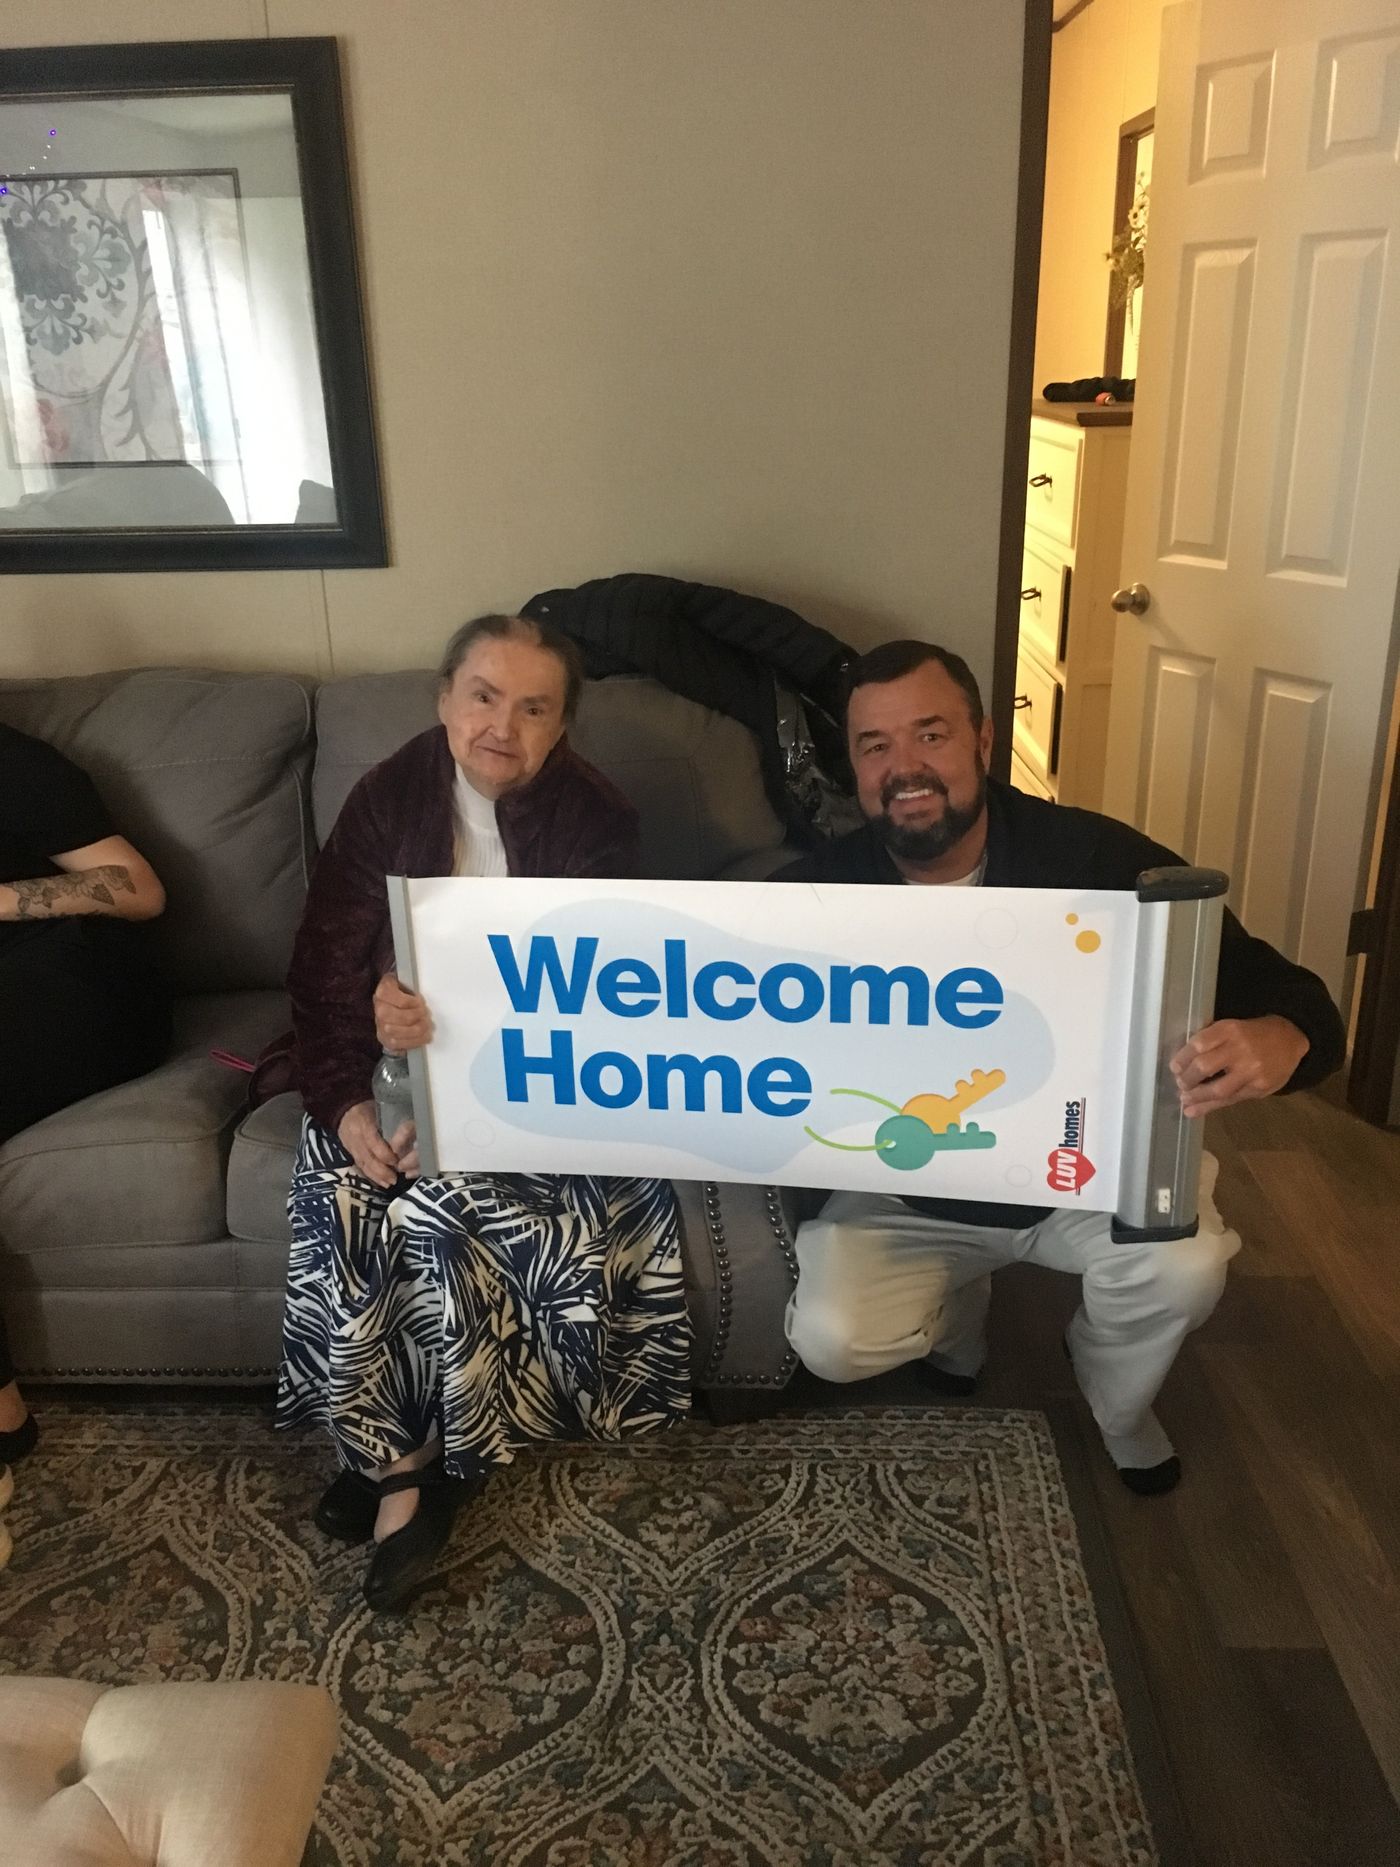 PHYLLIS F. welcome home image